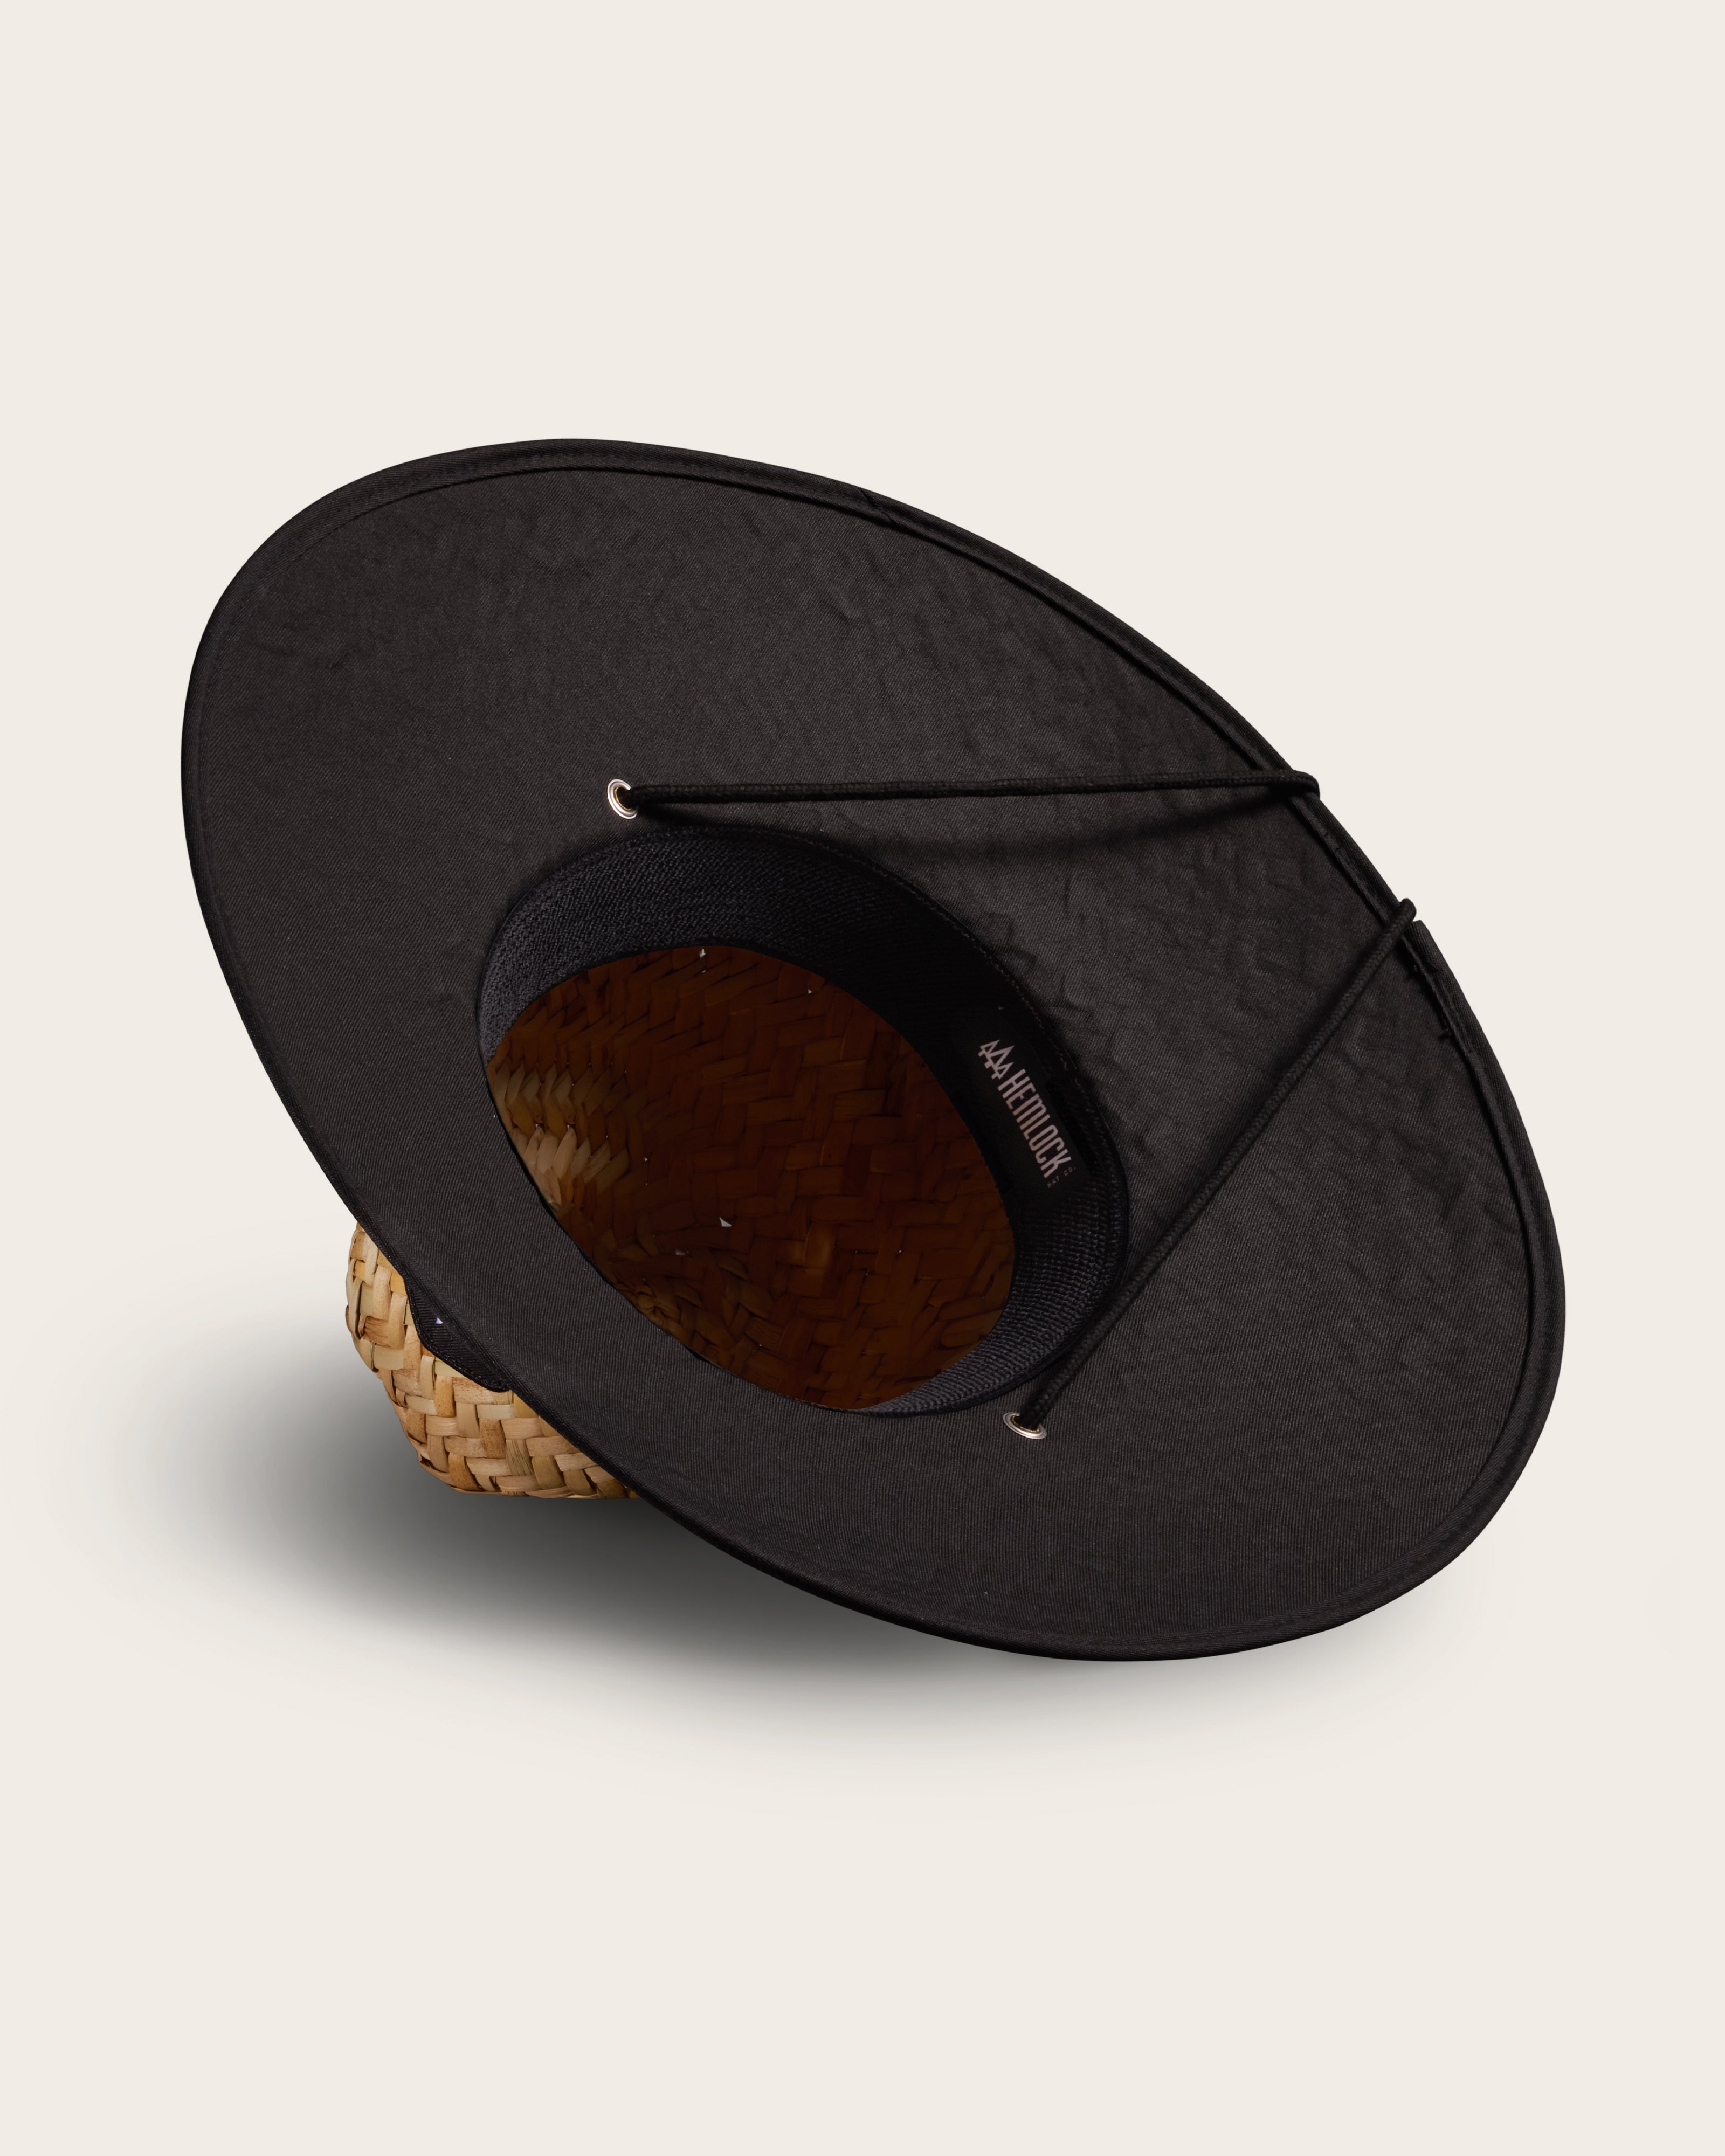 Hemlock Blackout straw lifeguard hat with Black color detailed view